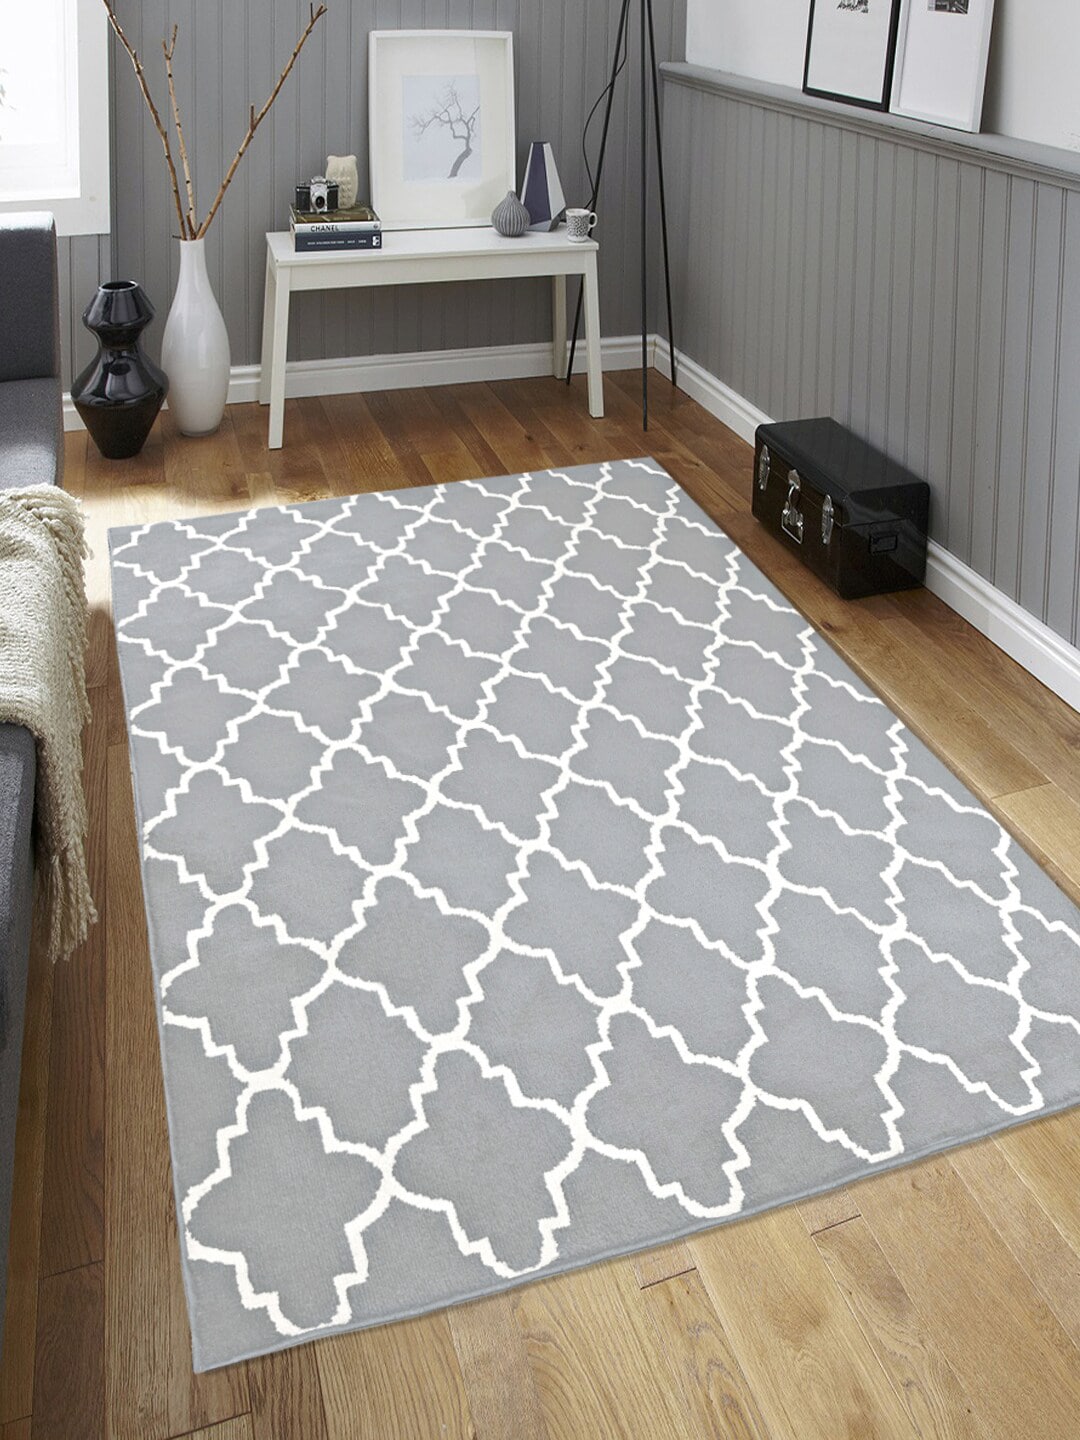 Saral Home Grey & White Ogee Patterned Microfiber Anti-Skid Carpet Price in India